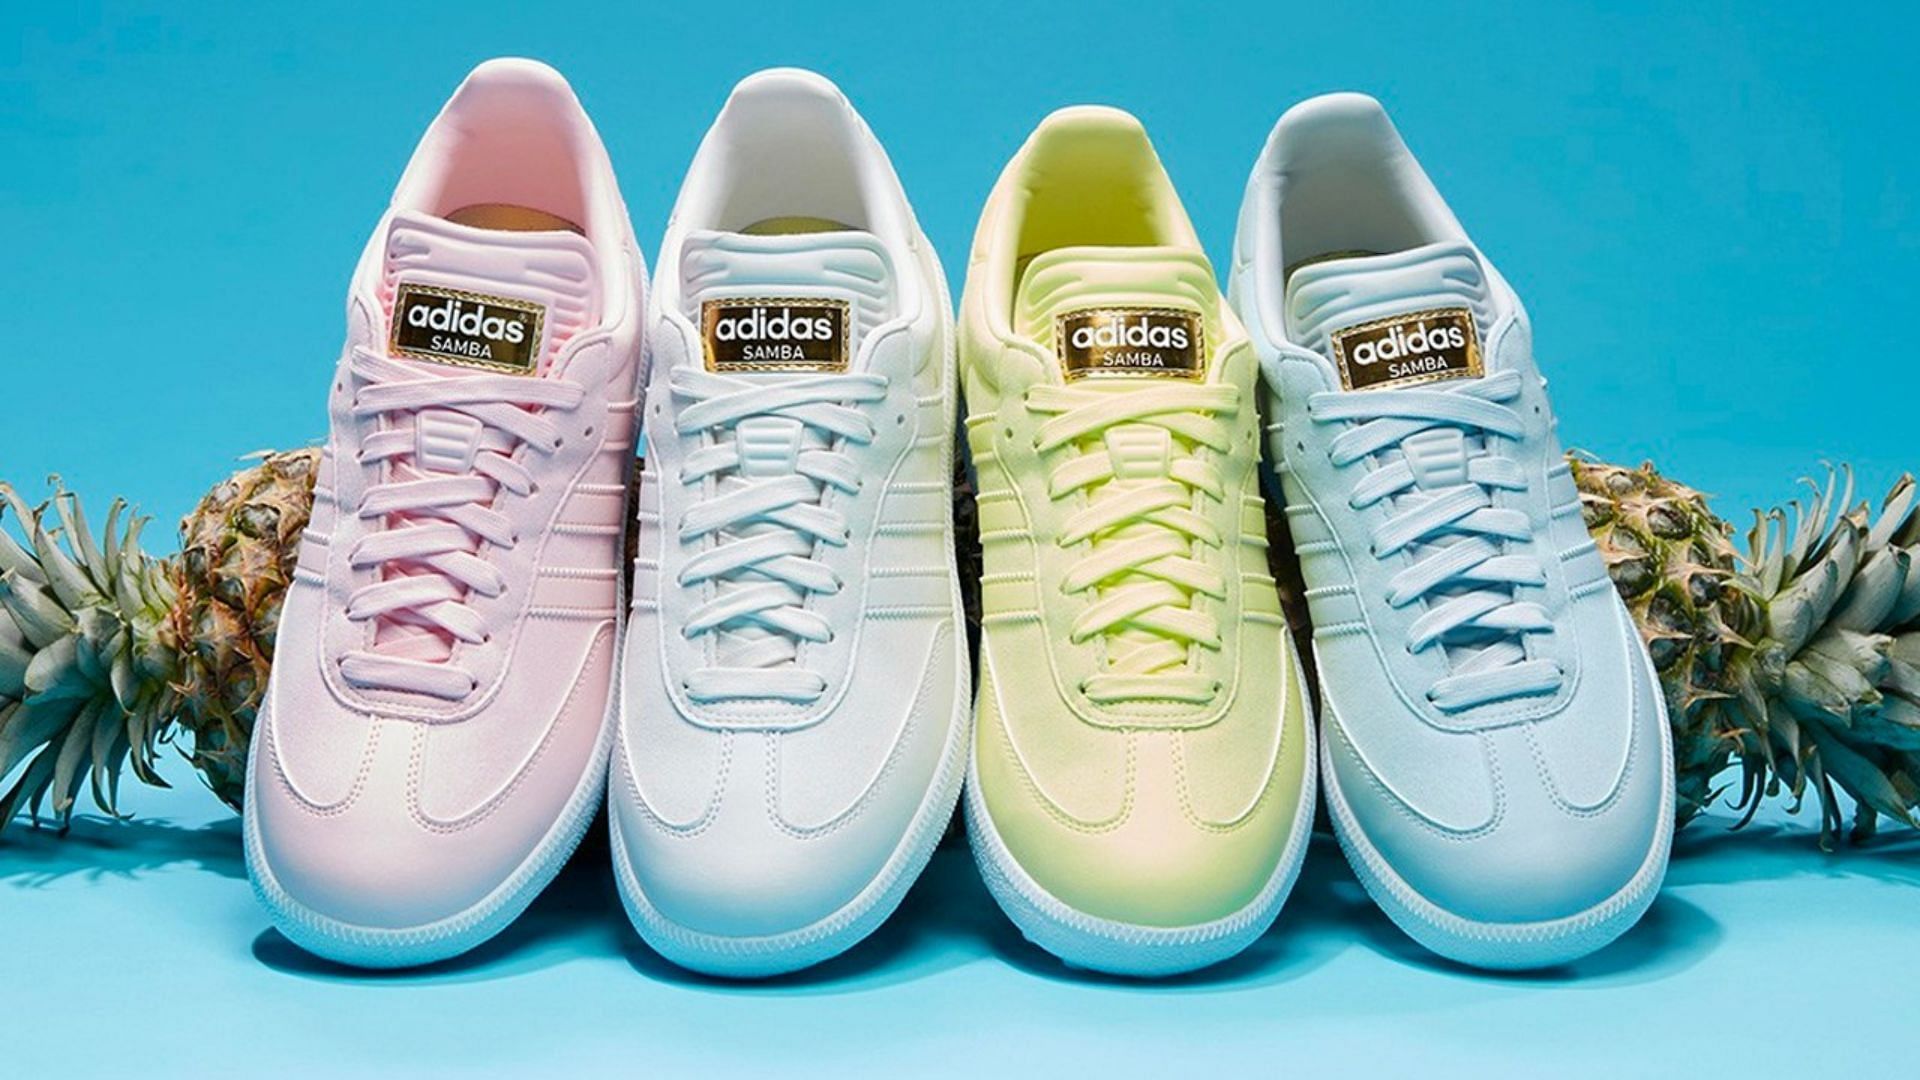 Adidas Samba Golf shoes will be introduced in four summer friendly colorways (Image via Adidas)